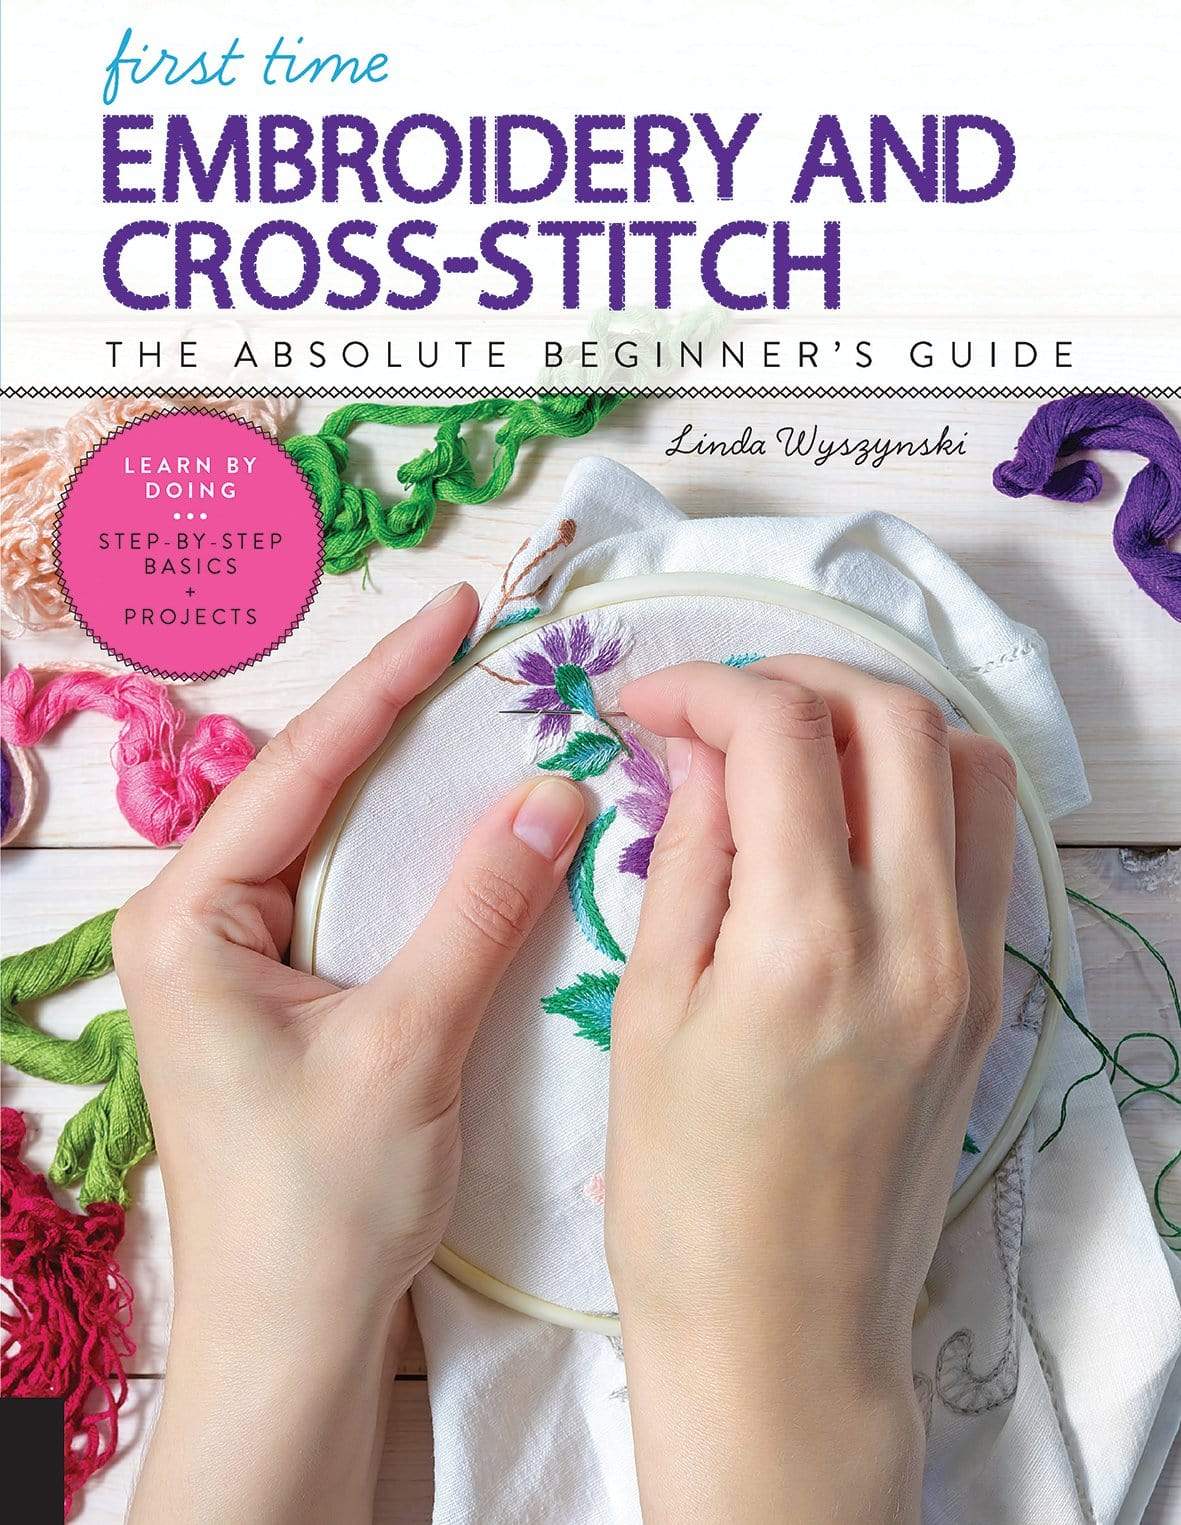 Search Press Patterns First Time Embroidery and Cross-Stitch 9781631597978